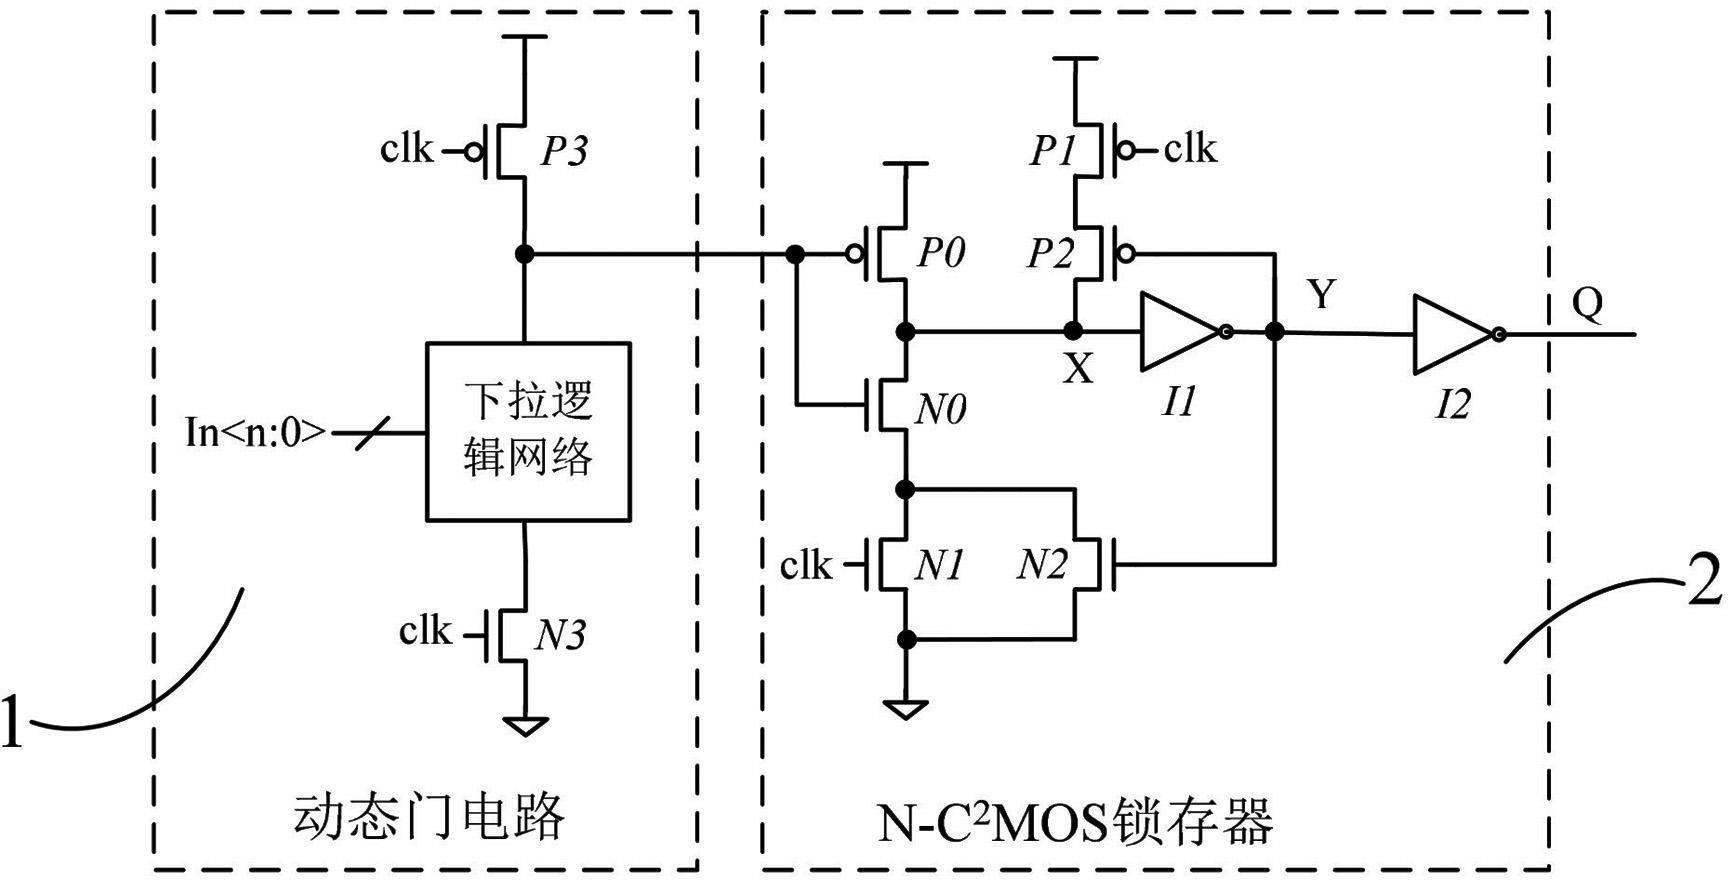 Limited overturning dynamic logic circuit with scanning function